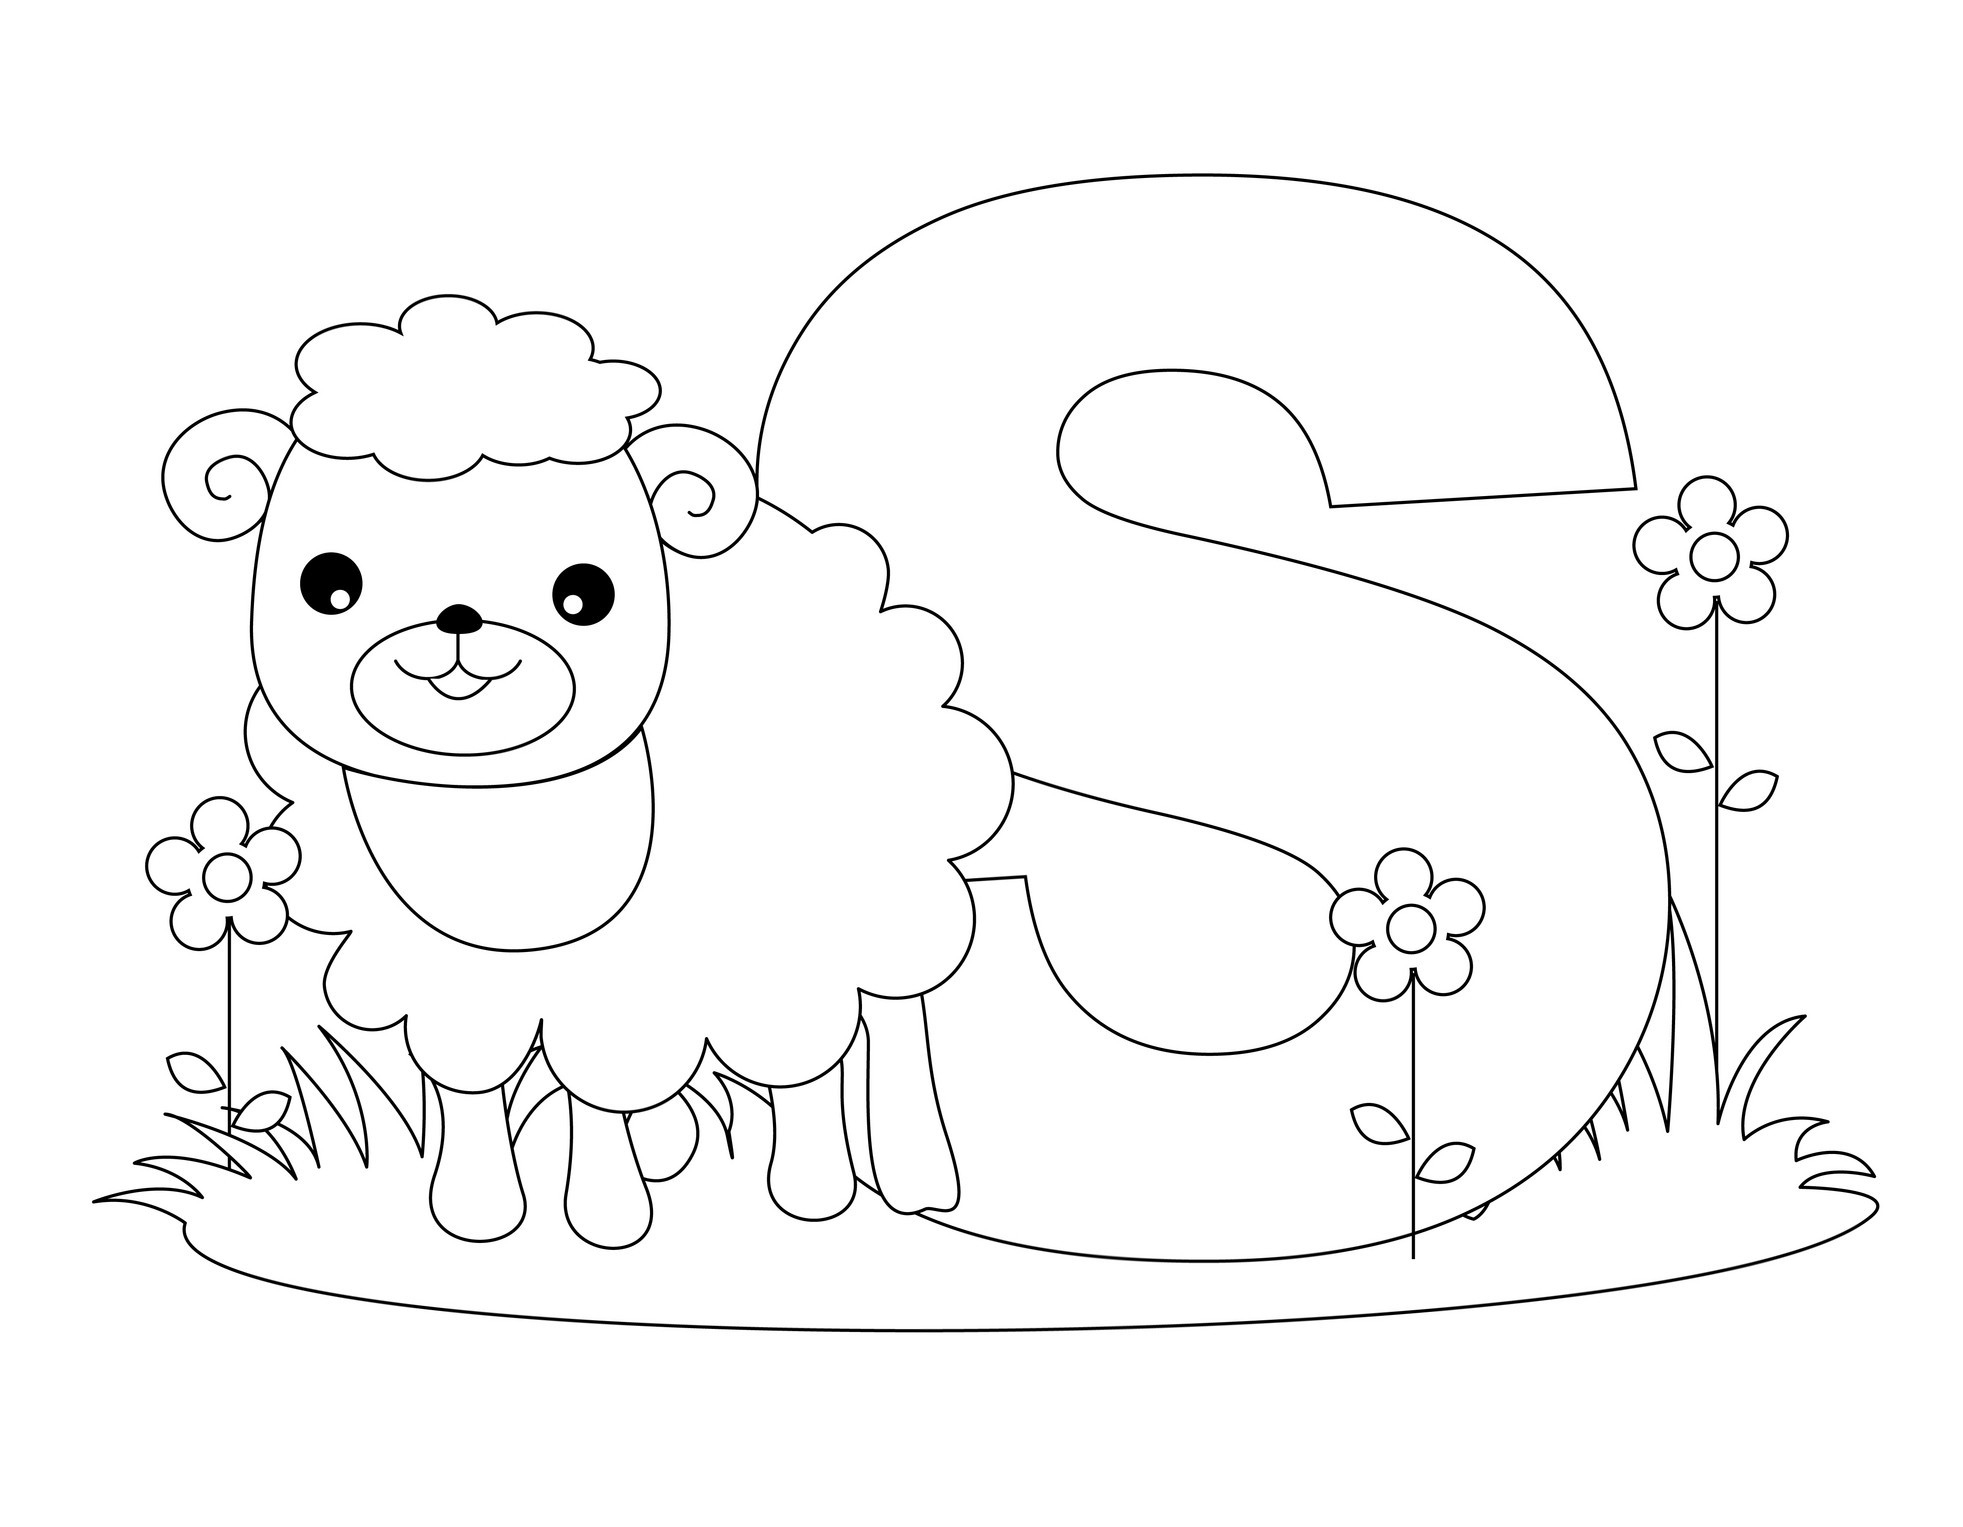 Printable Difficult 15+ Coloring Pages For Letter X - Coloring Home